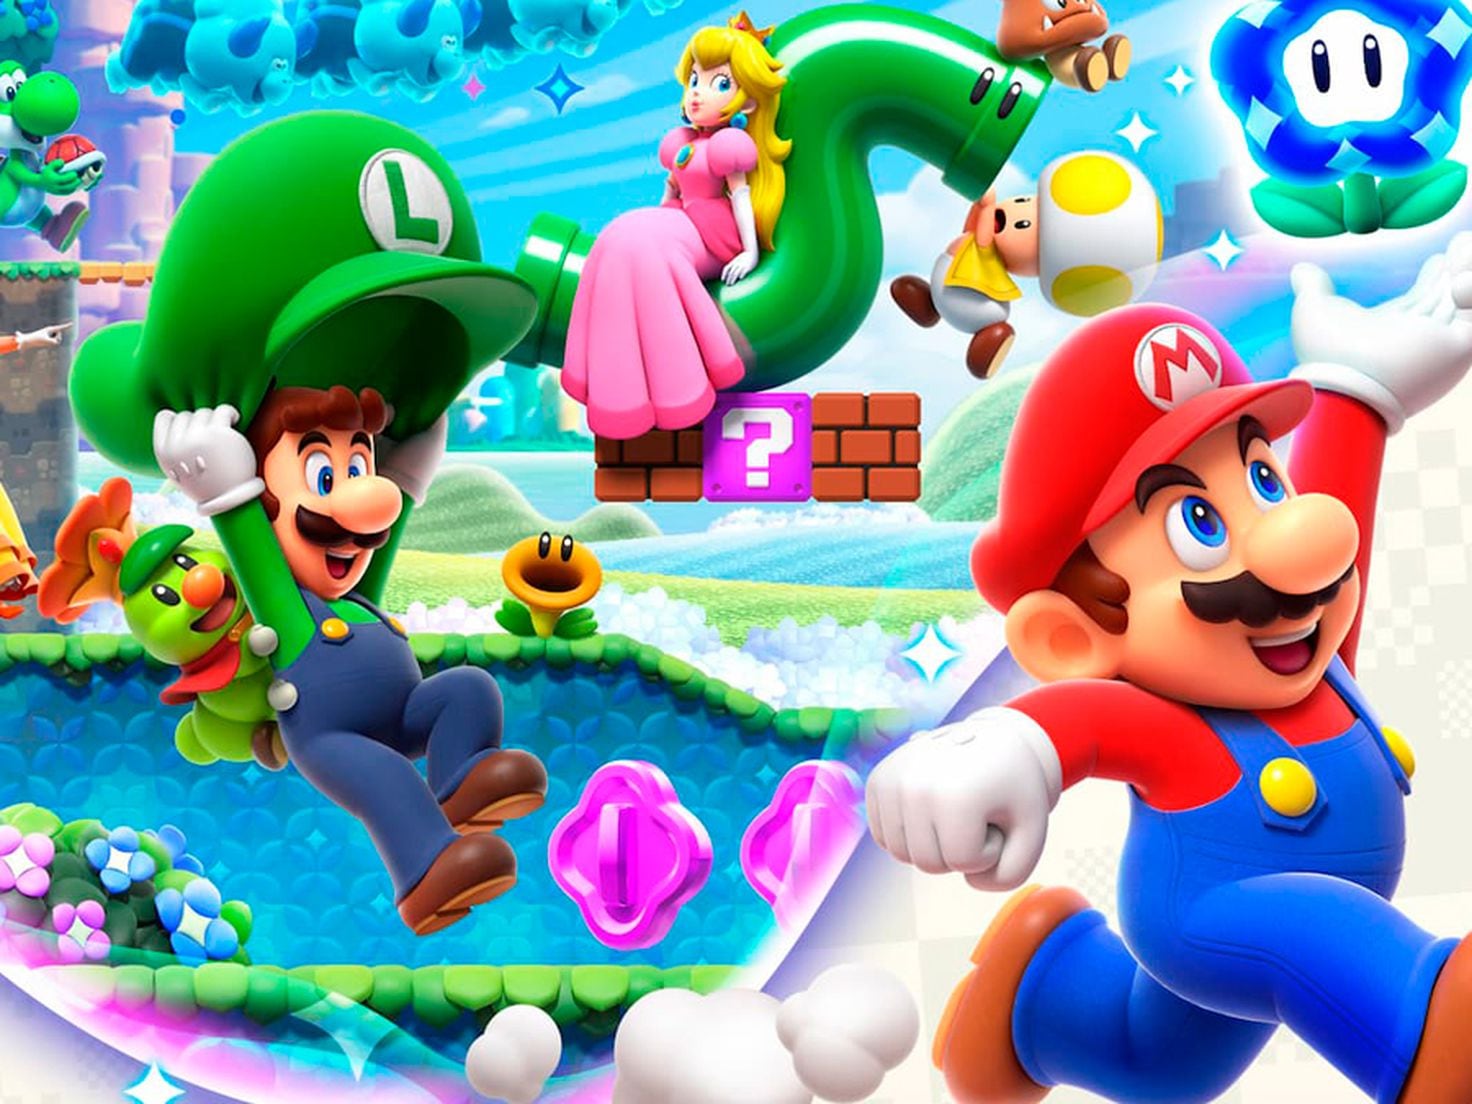 Super Mario Bros Wonder: release date, price and where to buy